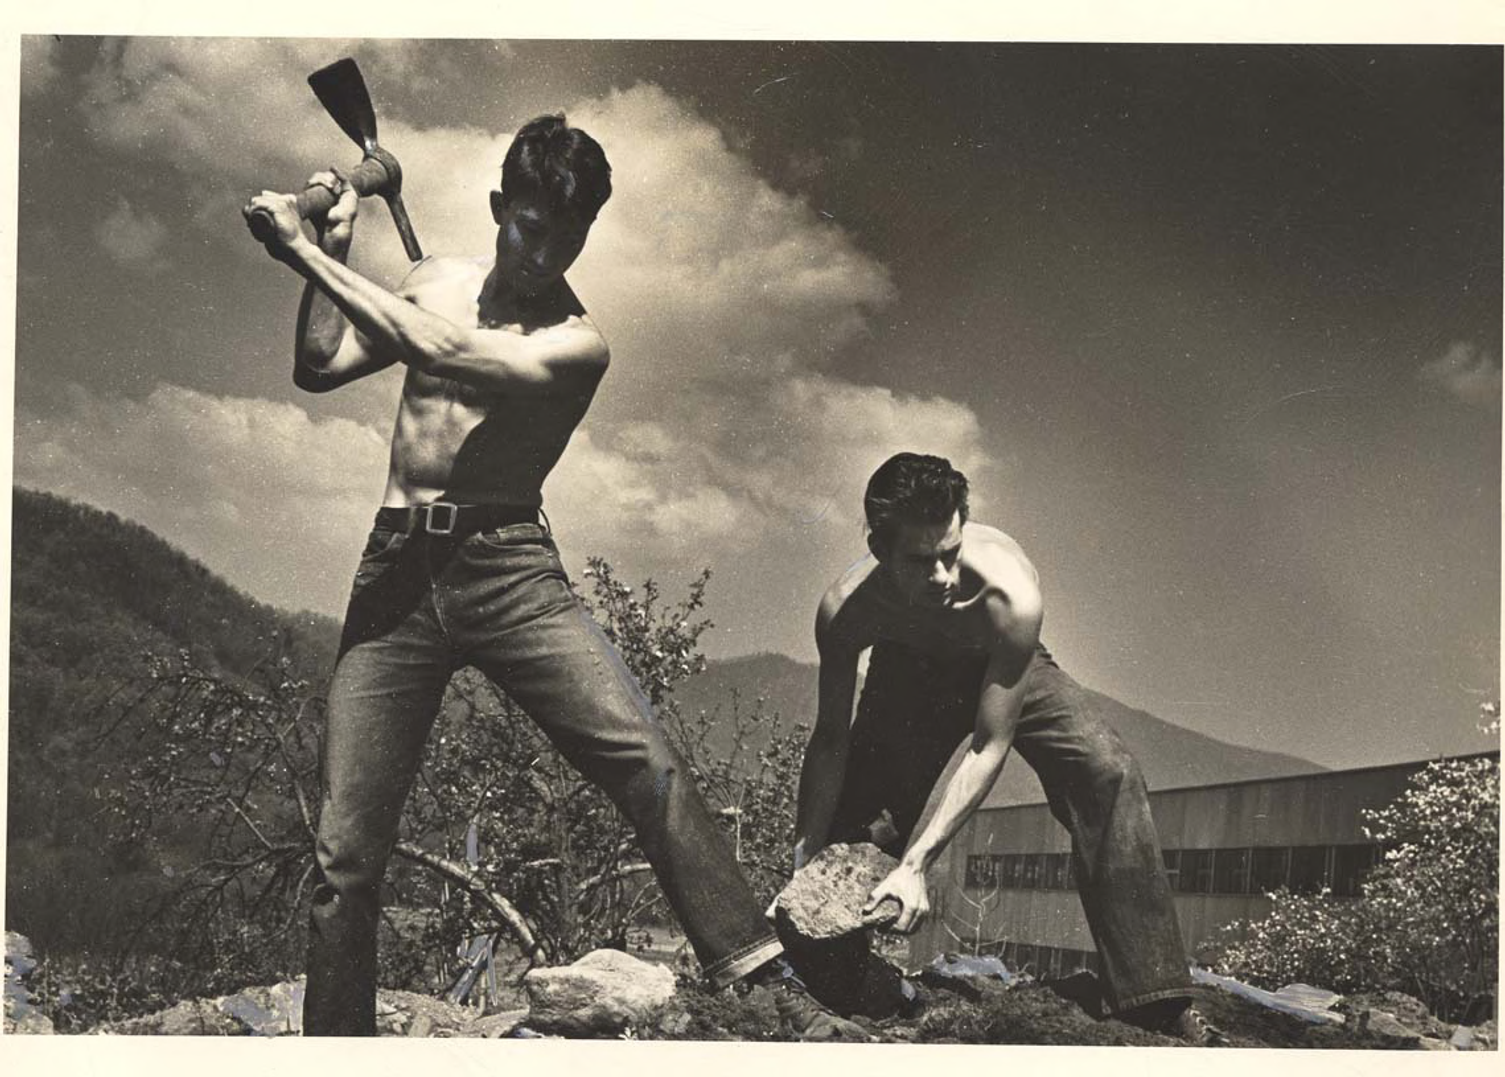 Photograph from Black Mountain College